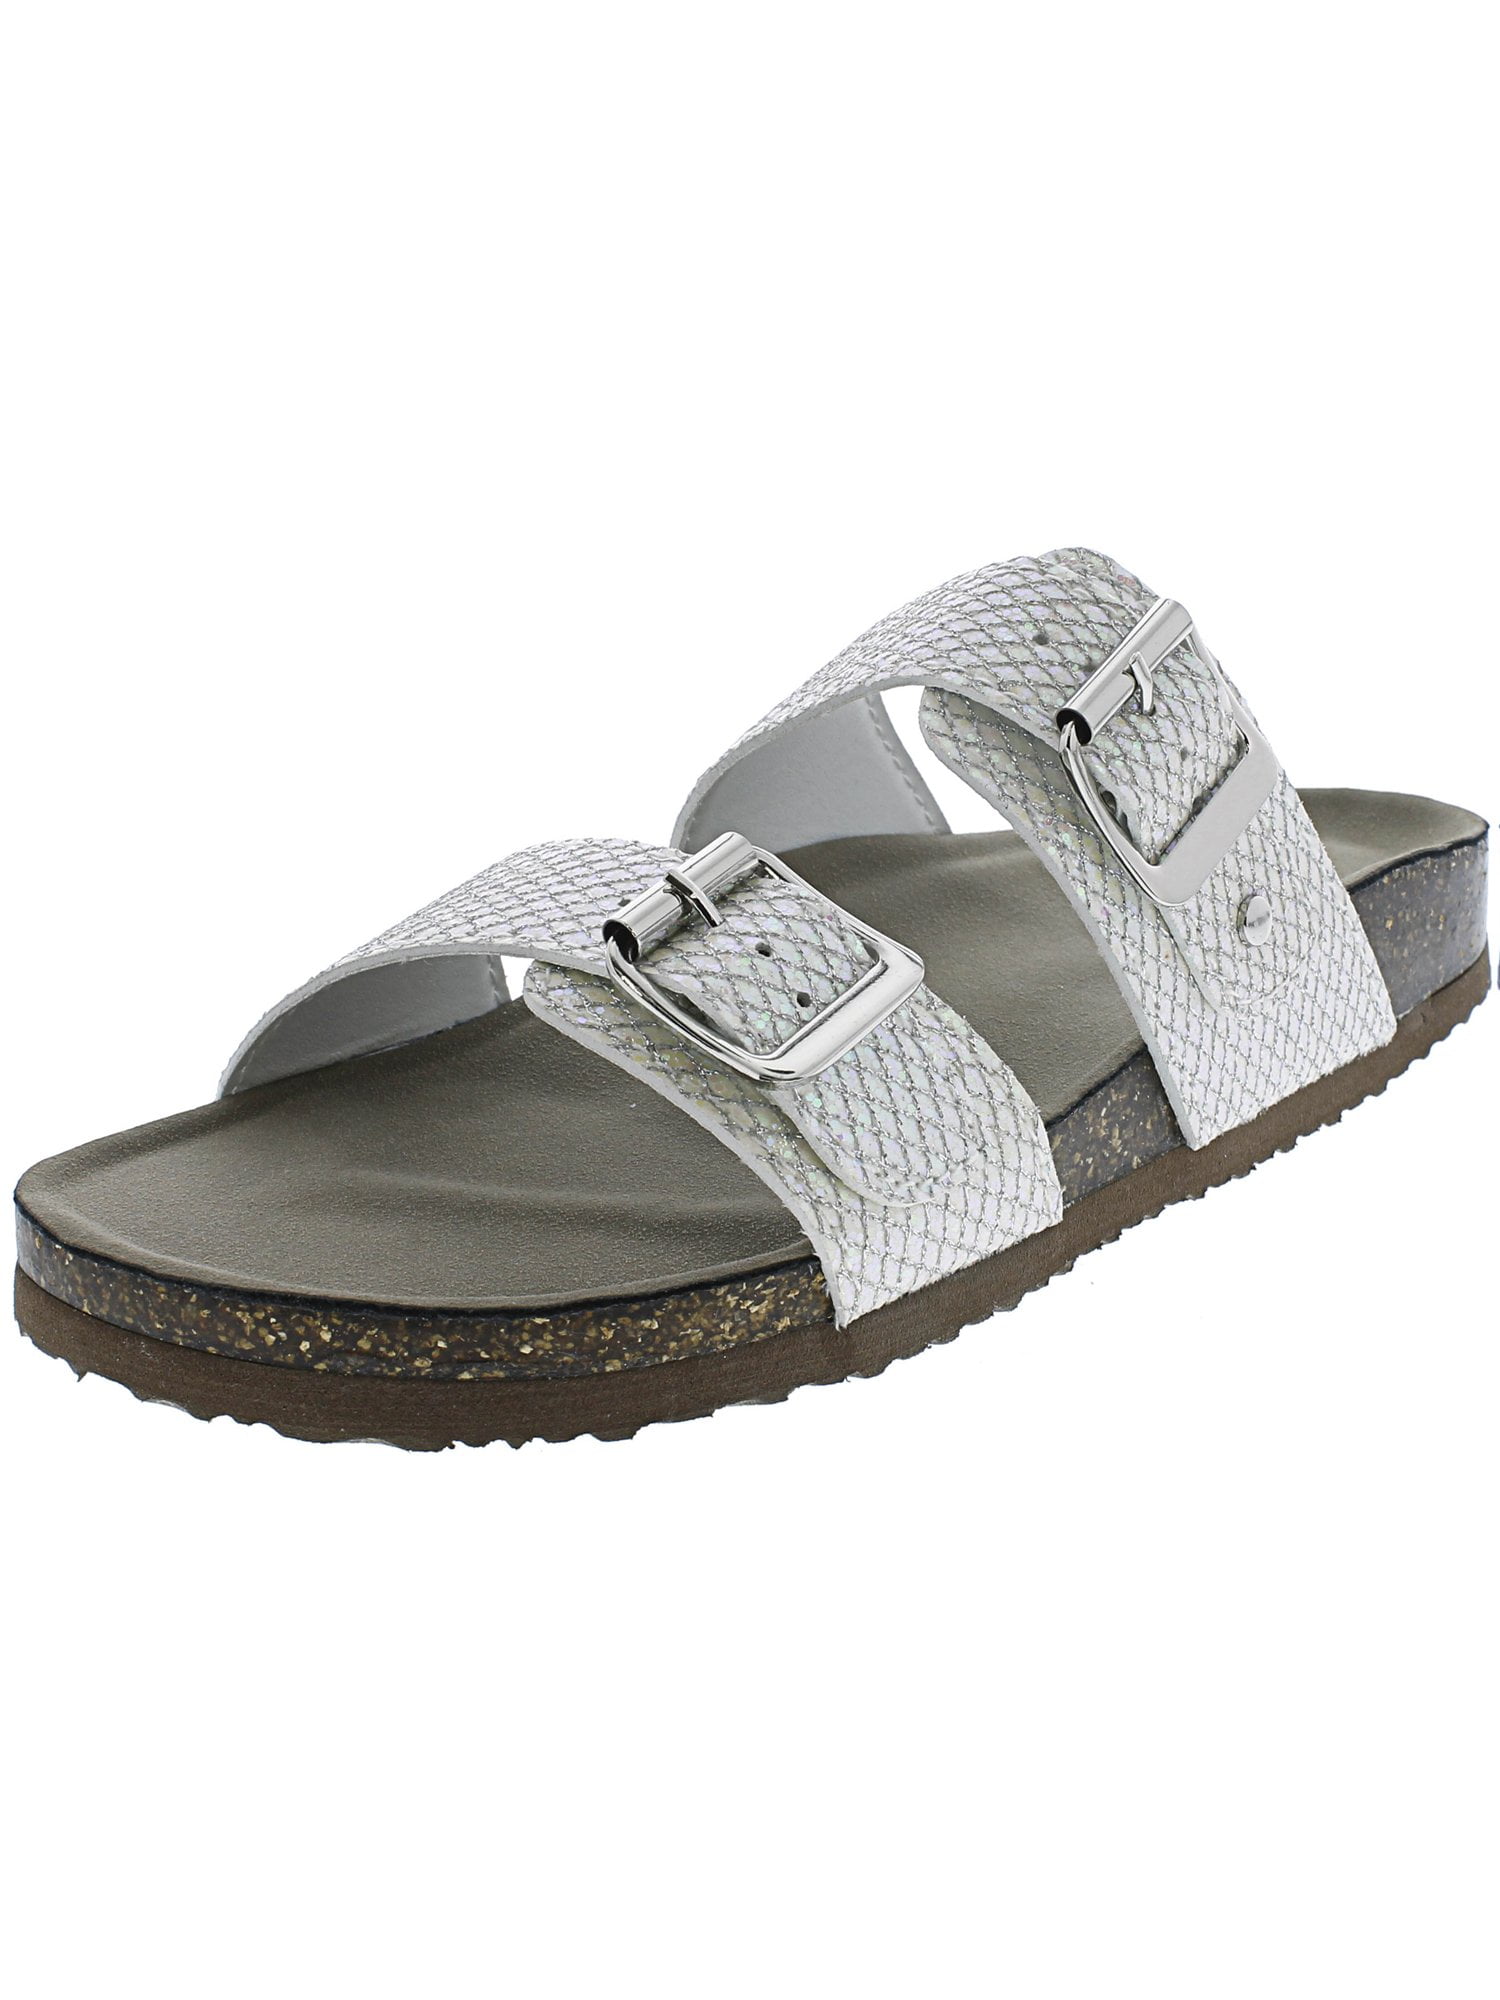 madden girl leather sandals